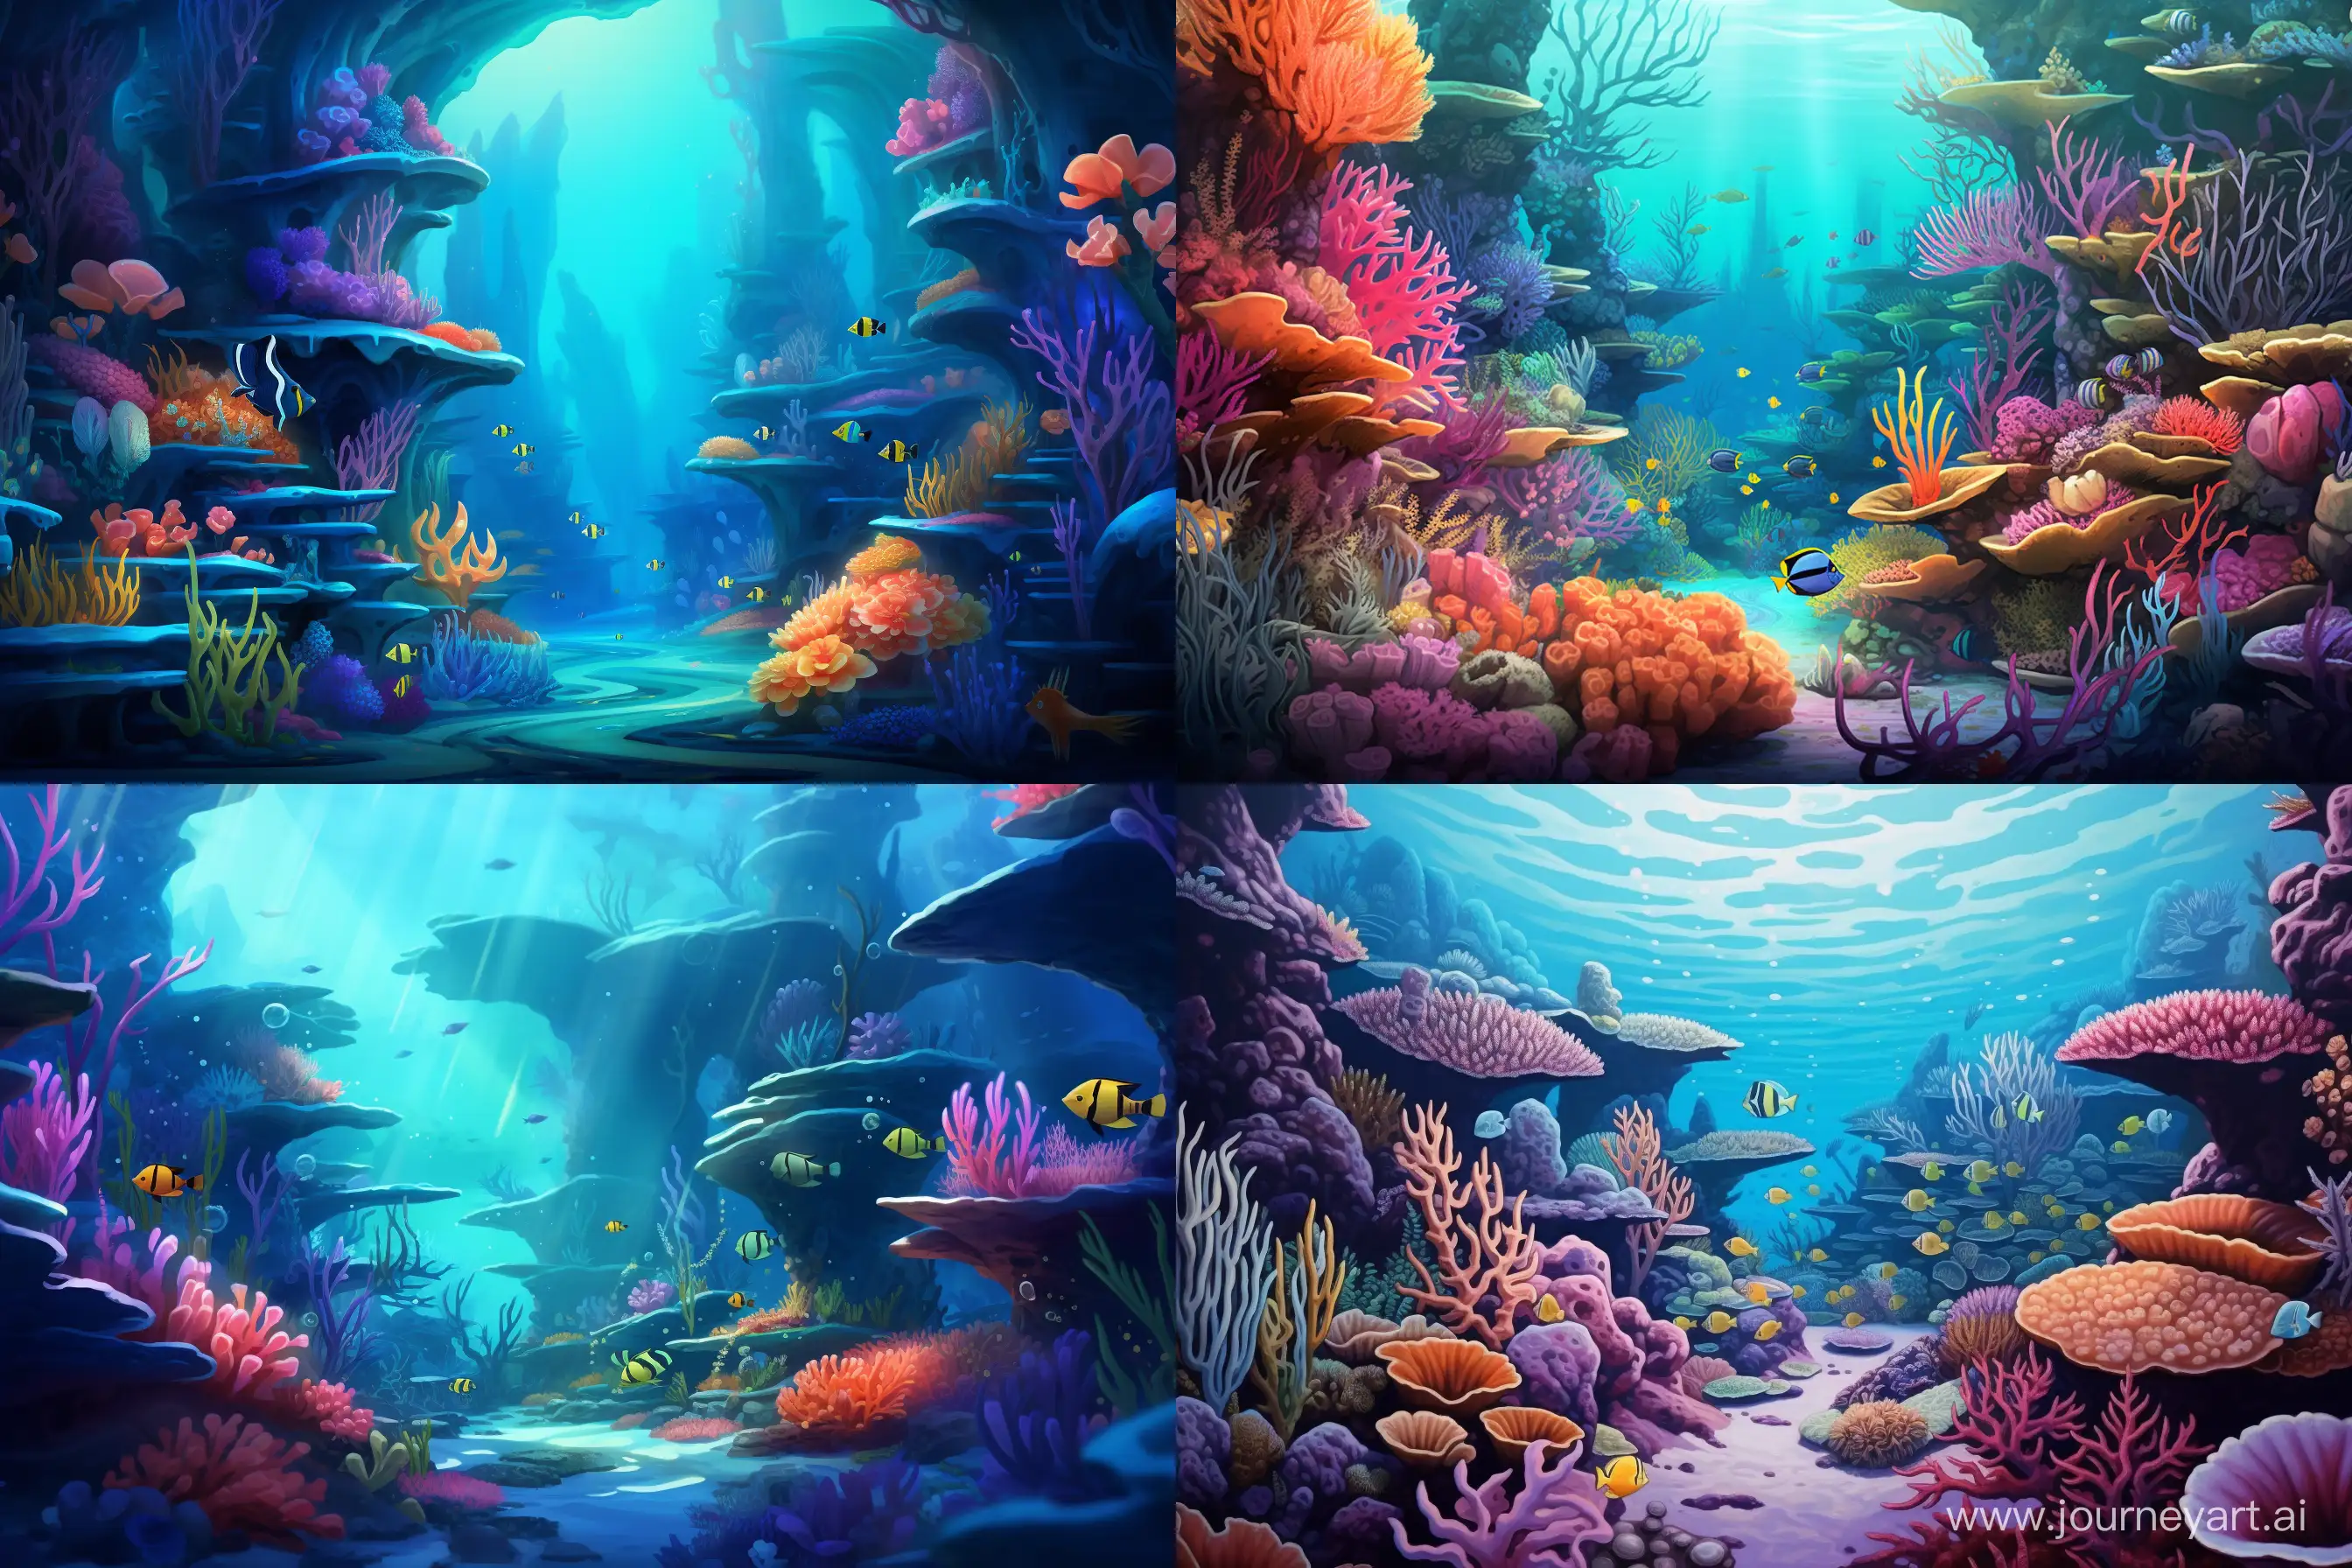 Vibrant-Coral-Reef-Ecosystem-Teeming-with-Colorful-Fishes